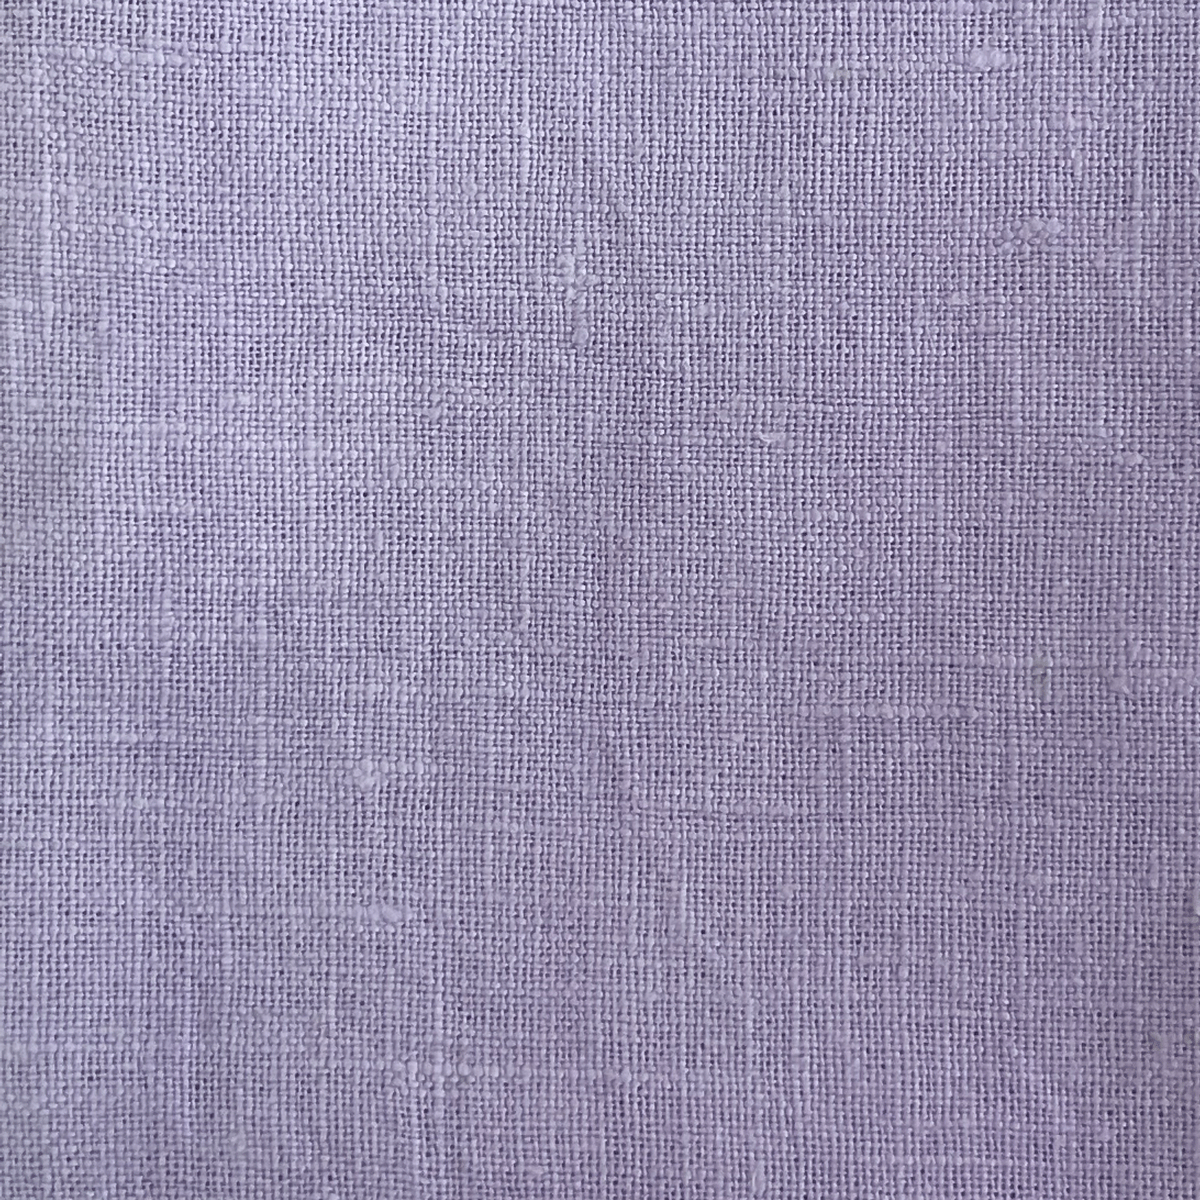 www.colourstreams.com.au Colour Streams Linen 36 Count Hand Dyed Purples Wisteria DL 1 Embroidery Cross Stitch Textile Arts Fibre Embroidery Slow Stitching Counted Meditative Australia